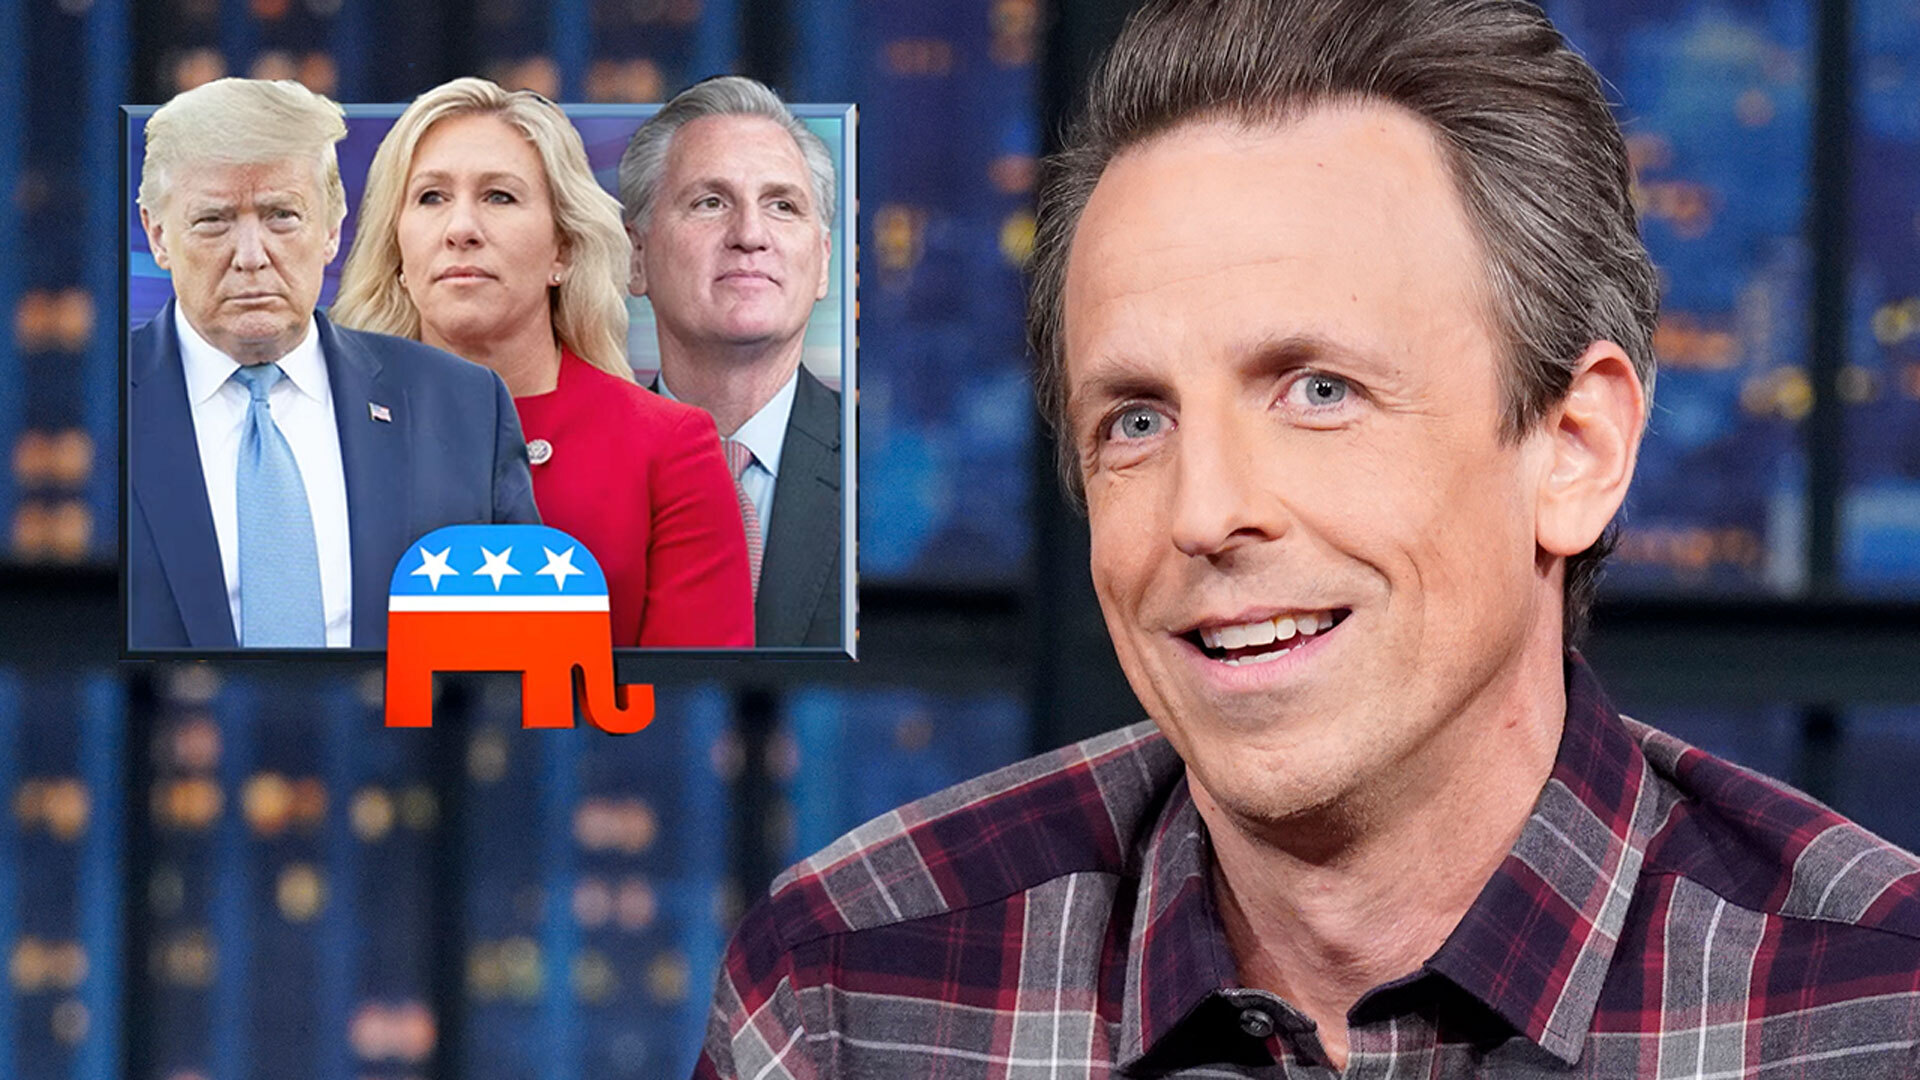 Watch Late Night With Seth Meyers Highlight Gop Caught In Classified Docs Hypocrisy As Trump